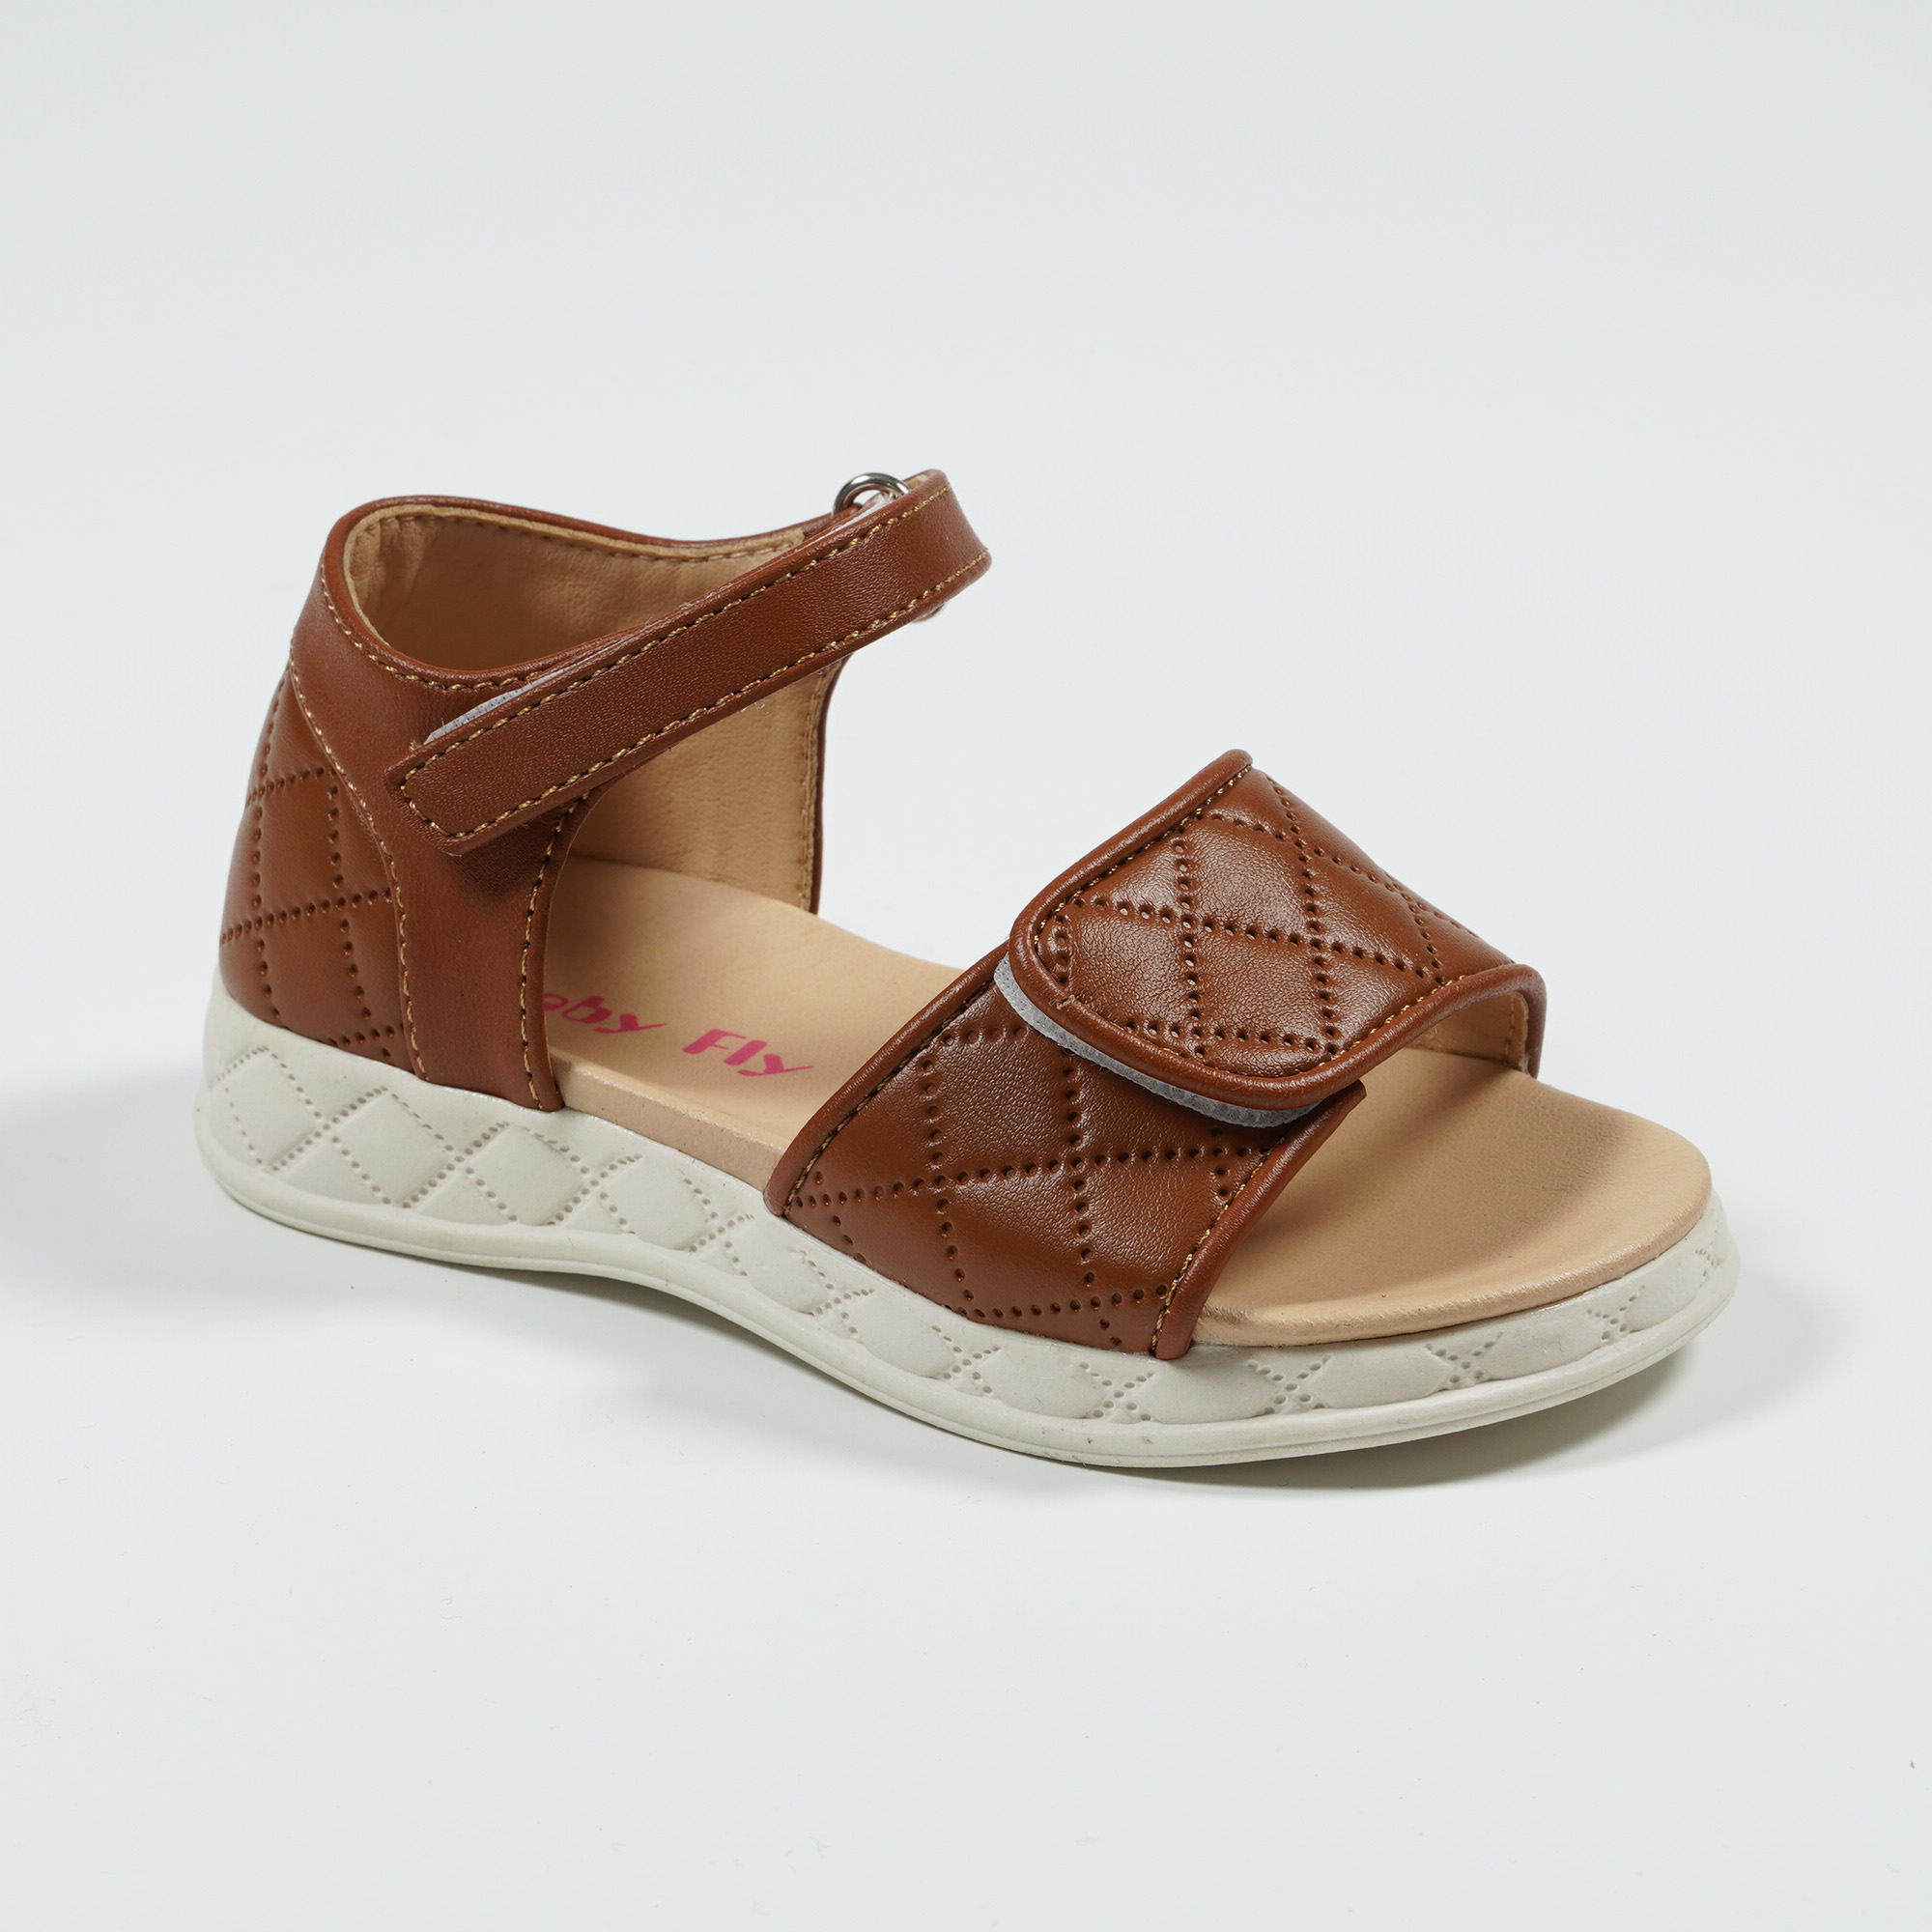 Nikoofly-2023-New-Arrivals-Plaid-Smbossed-Kids-Sandals-YDX9237-1-brown